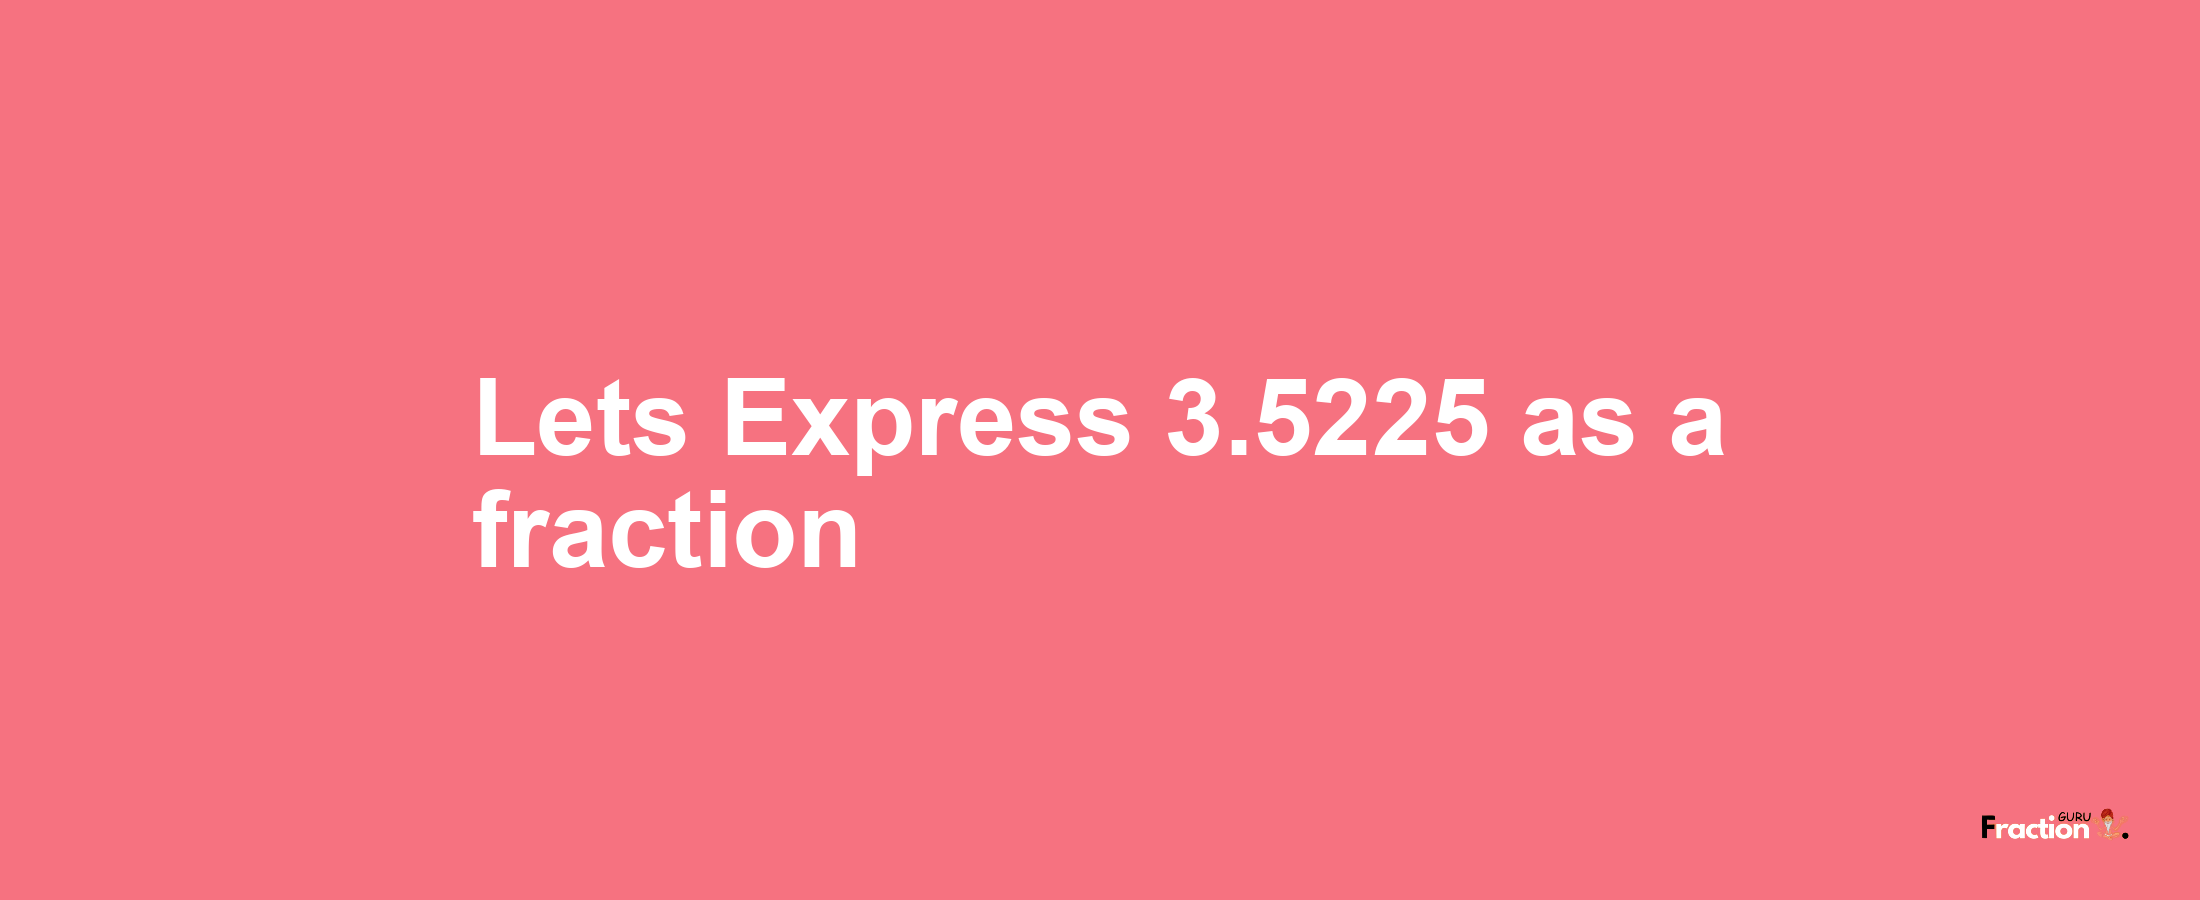 Lets Express 3.5225 as afraction